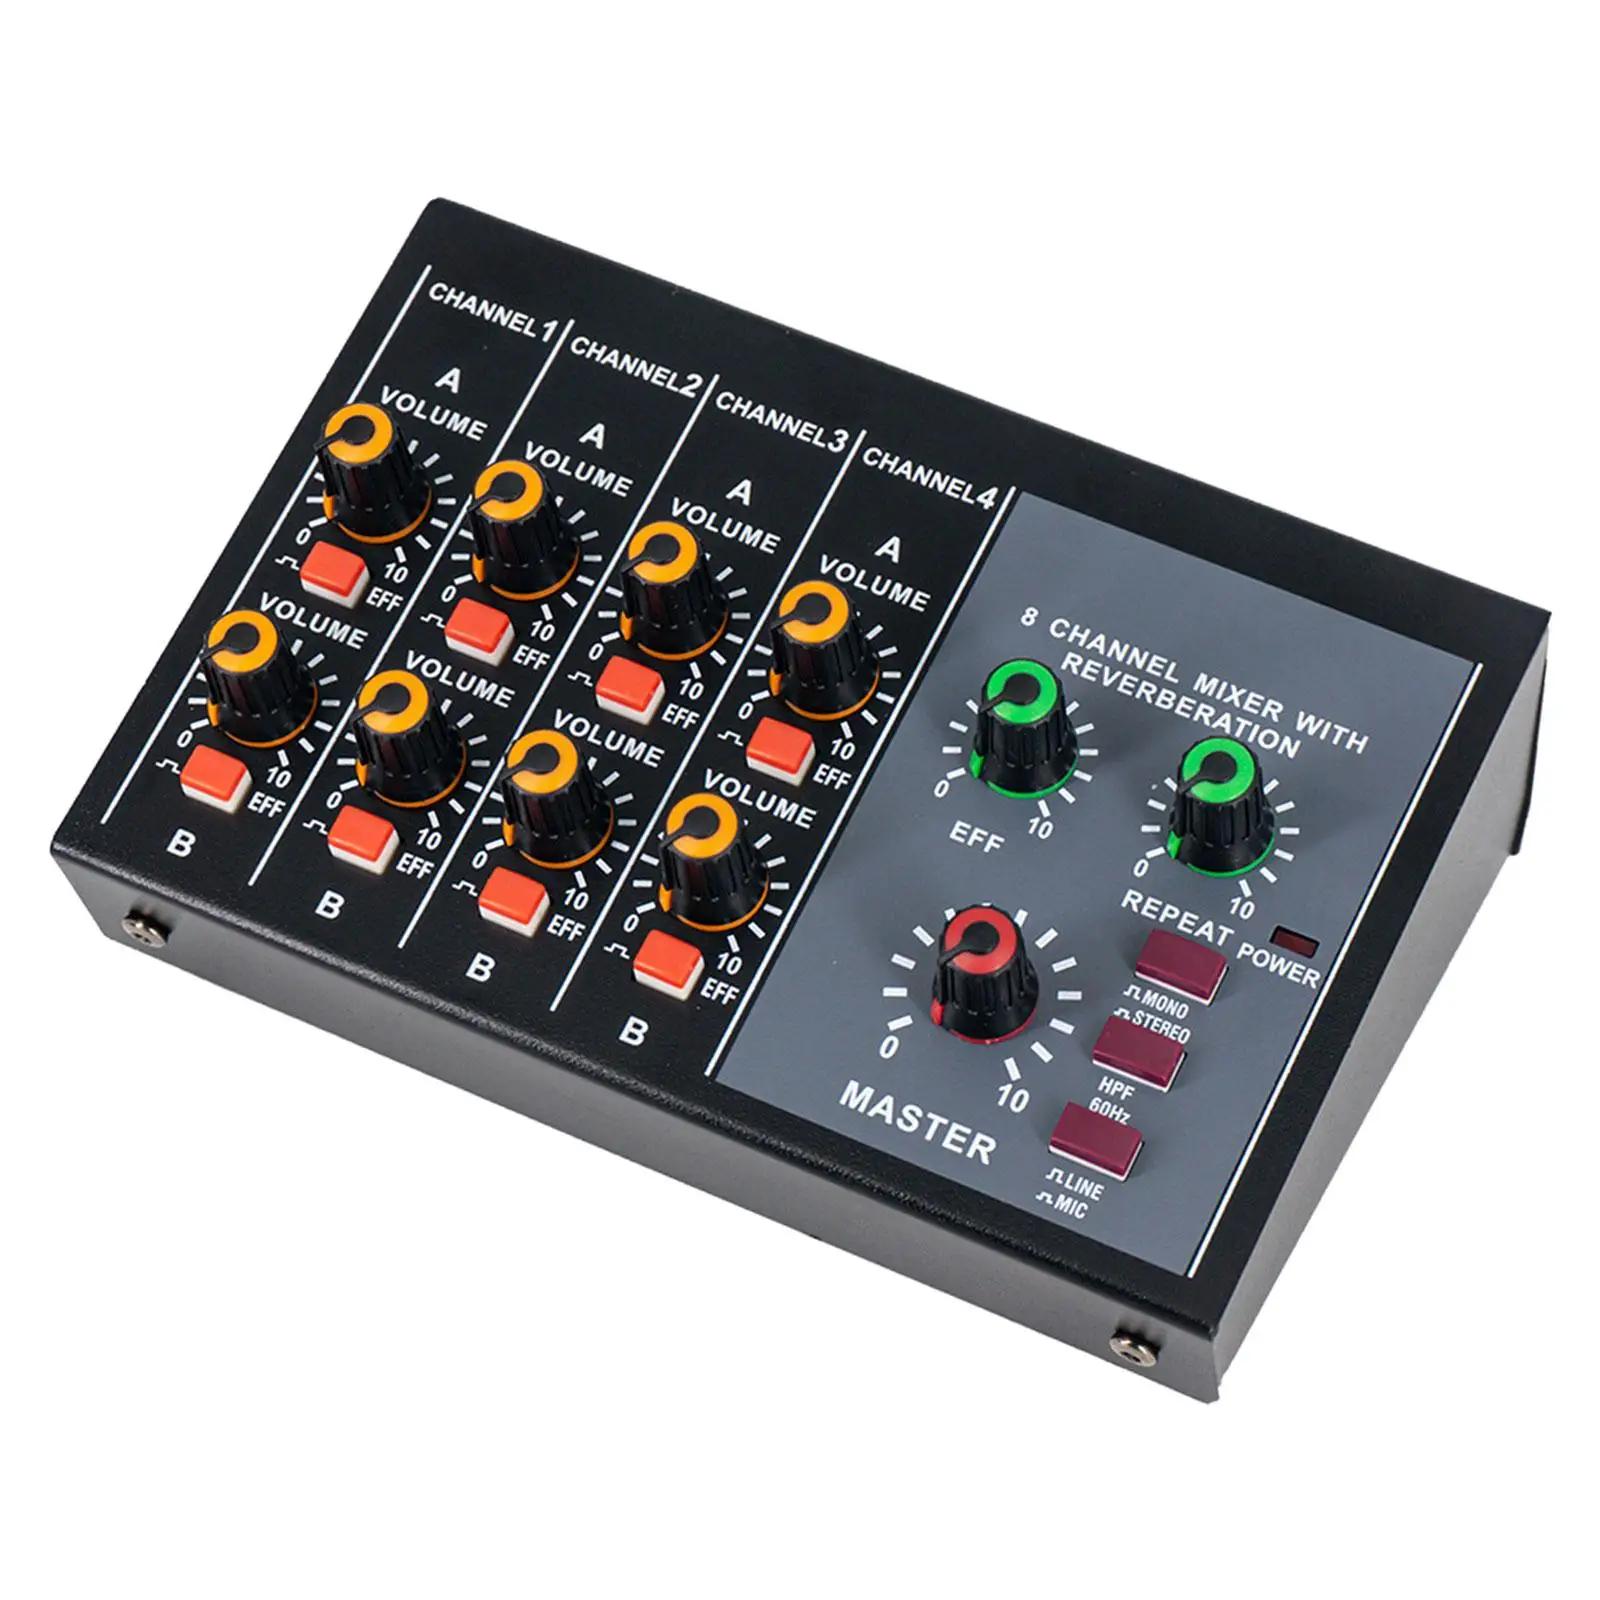 

8 Channel Mixer Professional Audio Mixer for Musical Instrument Connection Recording